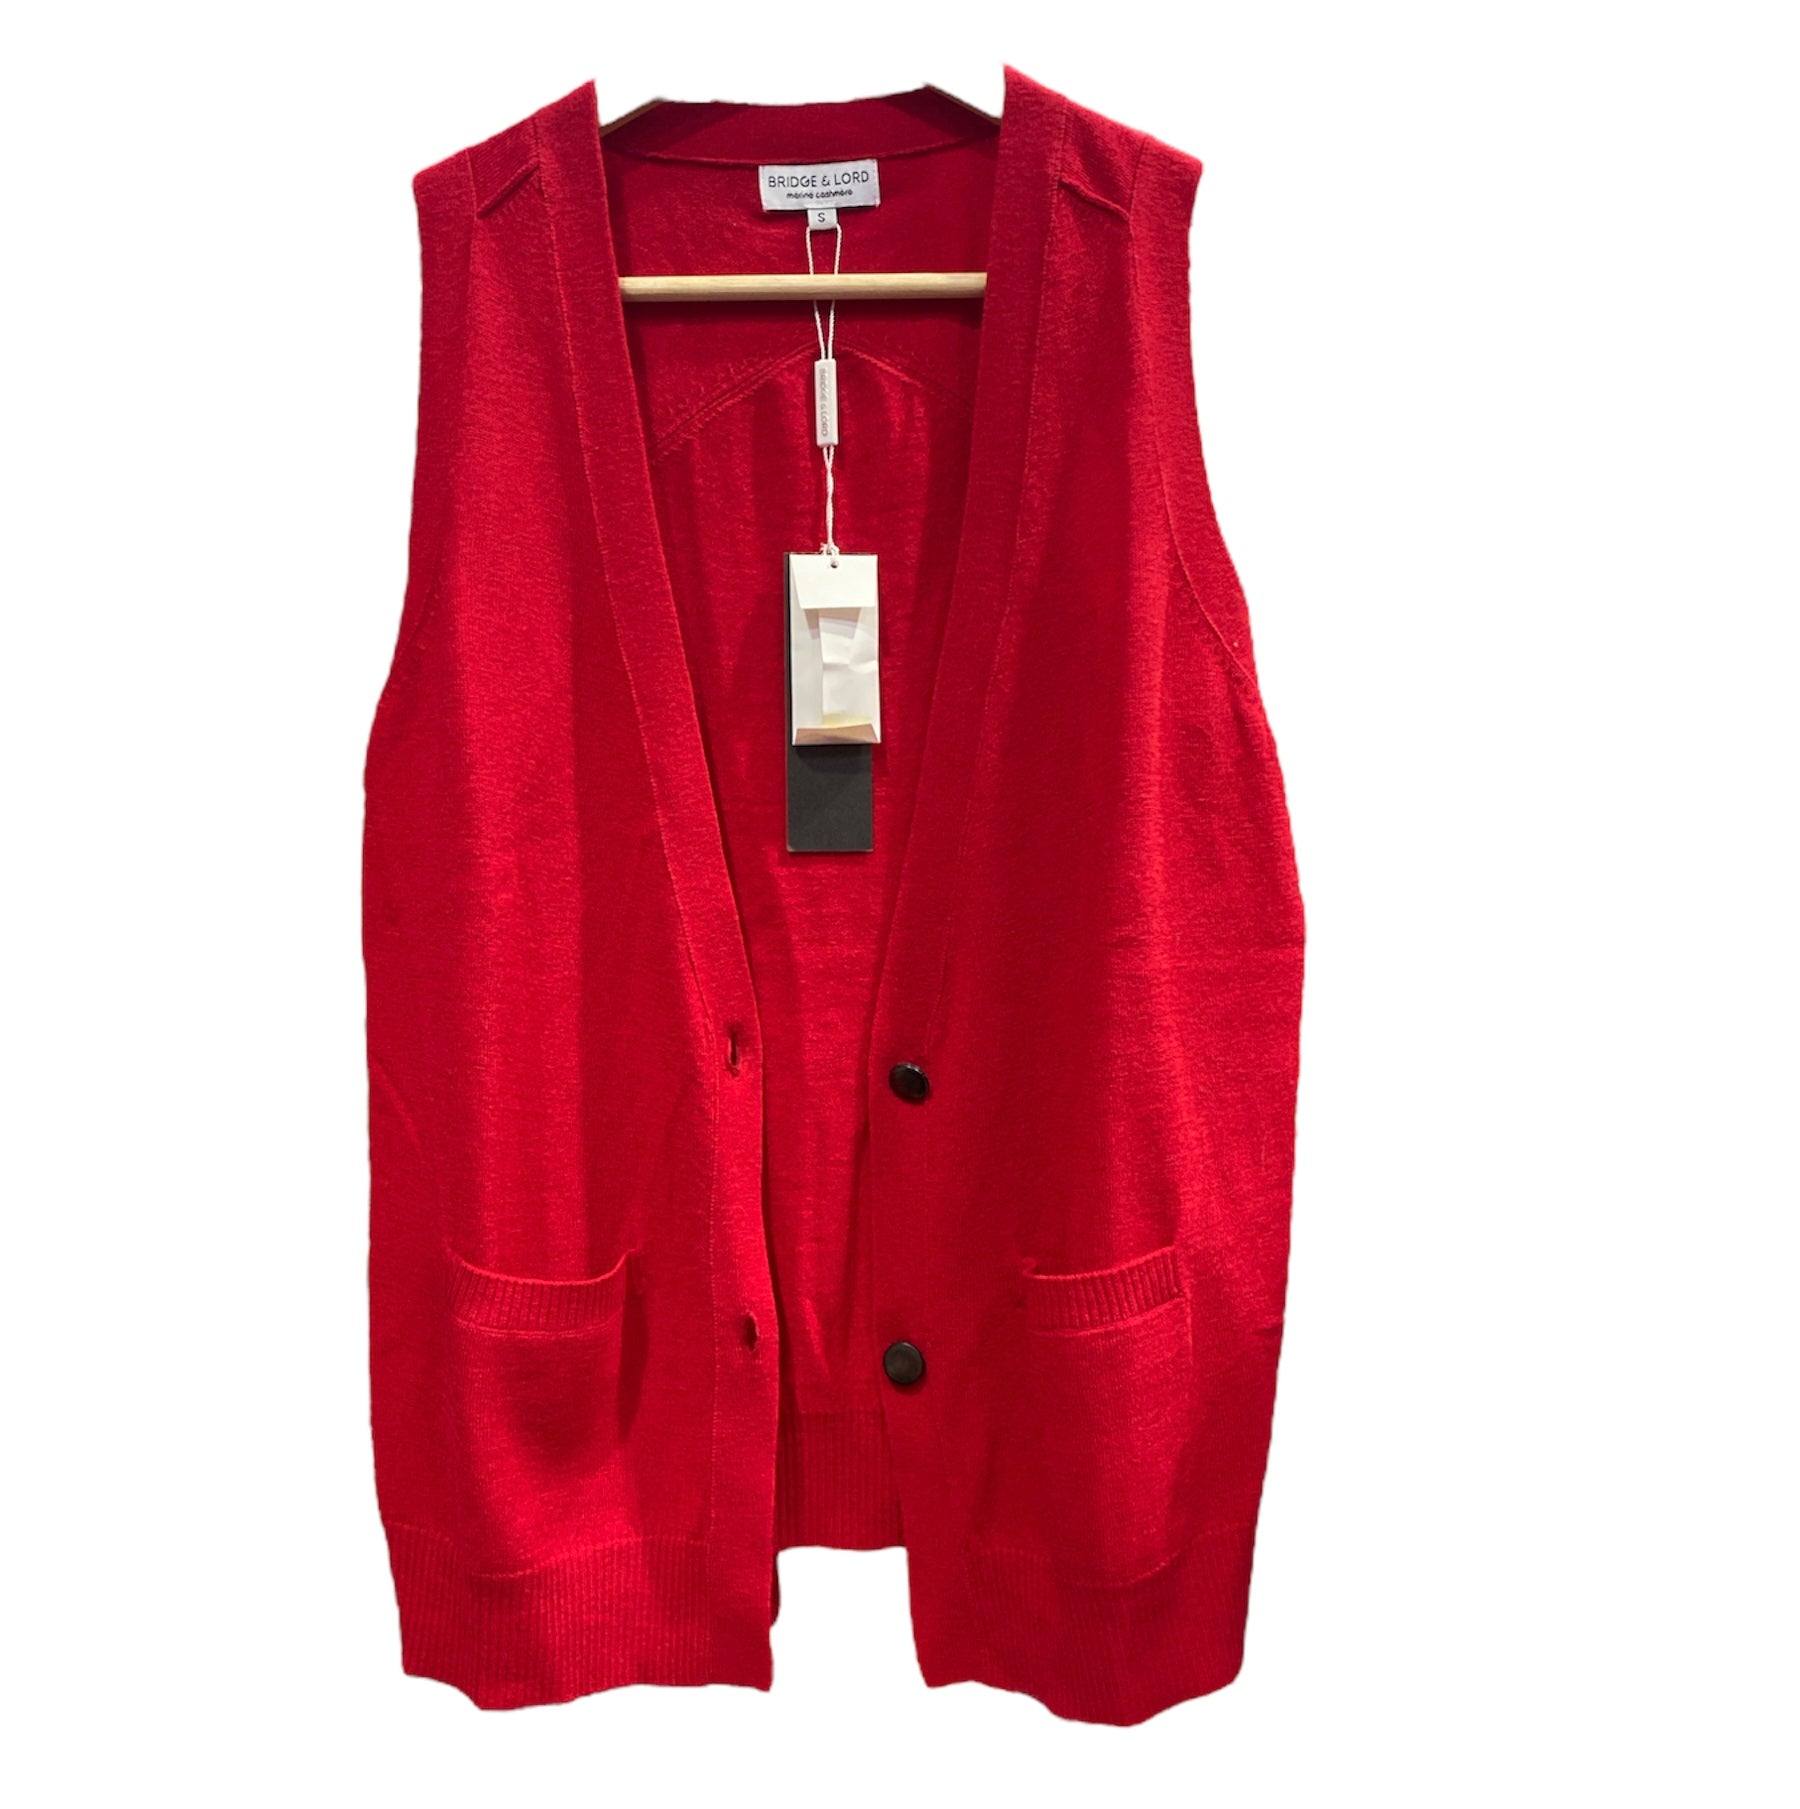 WOMENS CARDIGAN VEST WITH BUTTONS AND POCKETS - Knitworld Australia